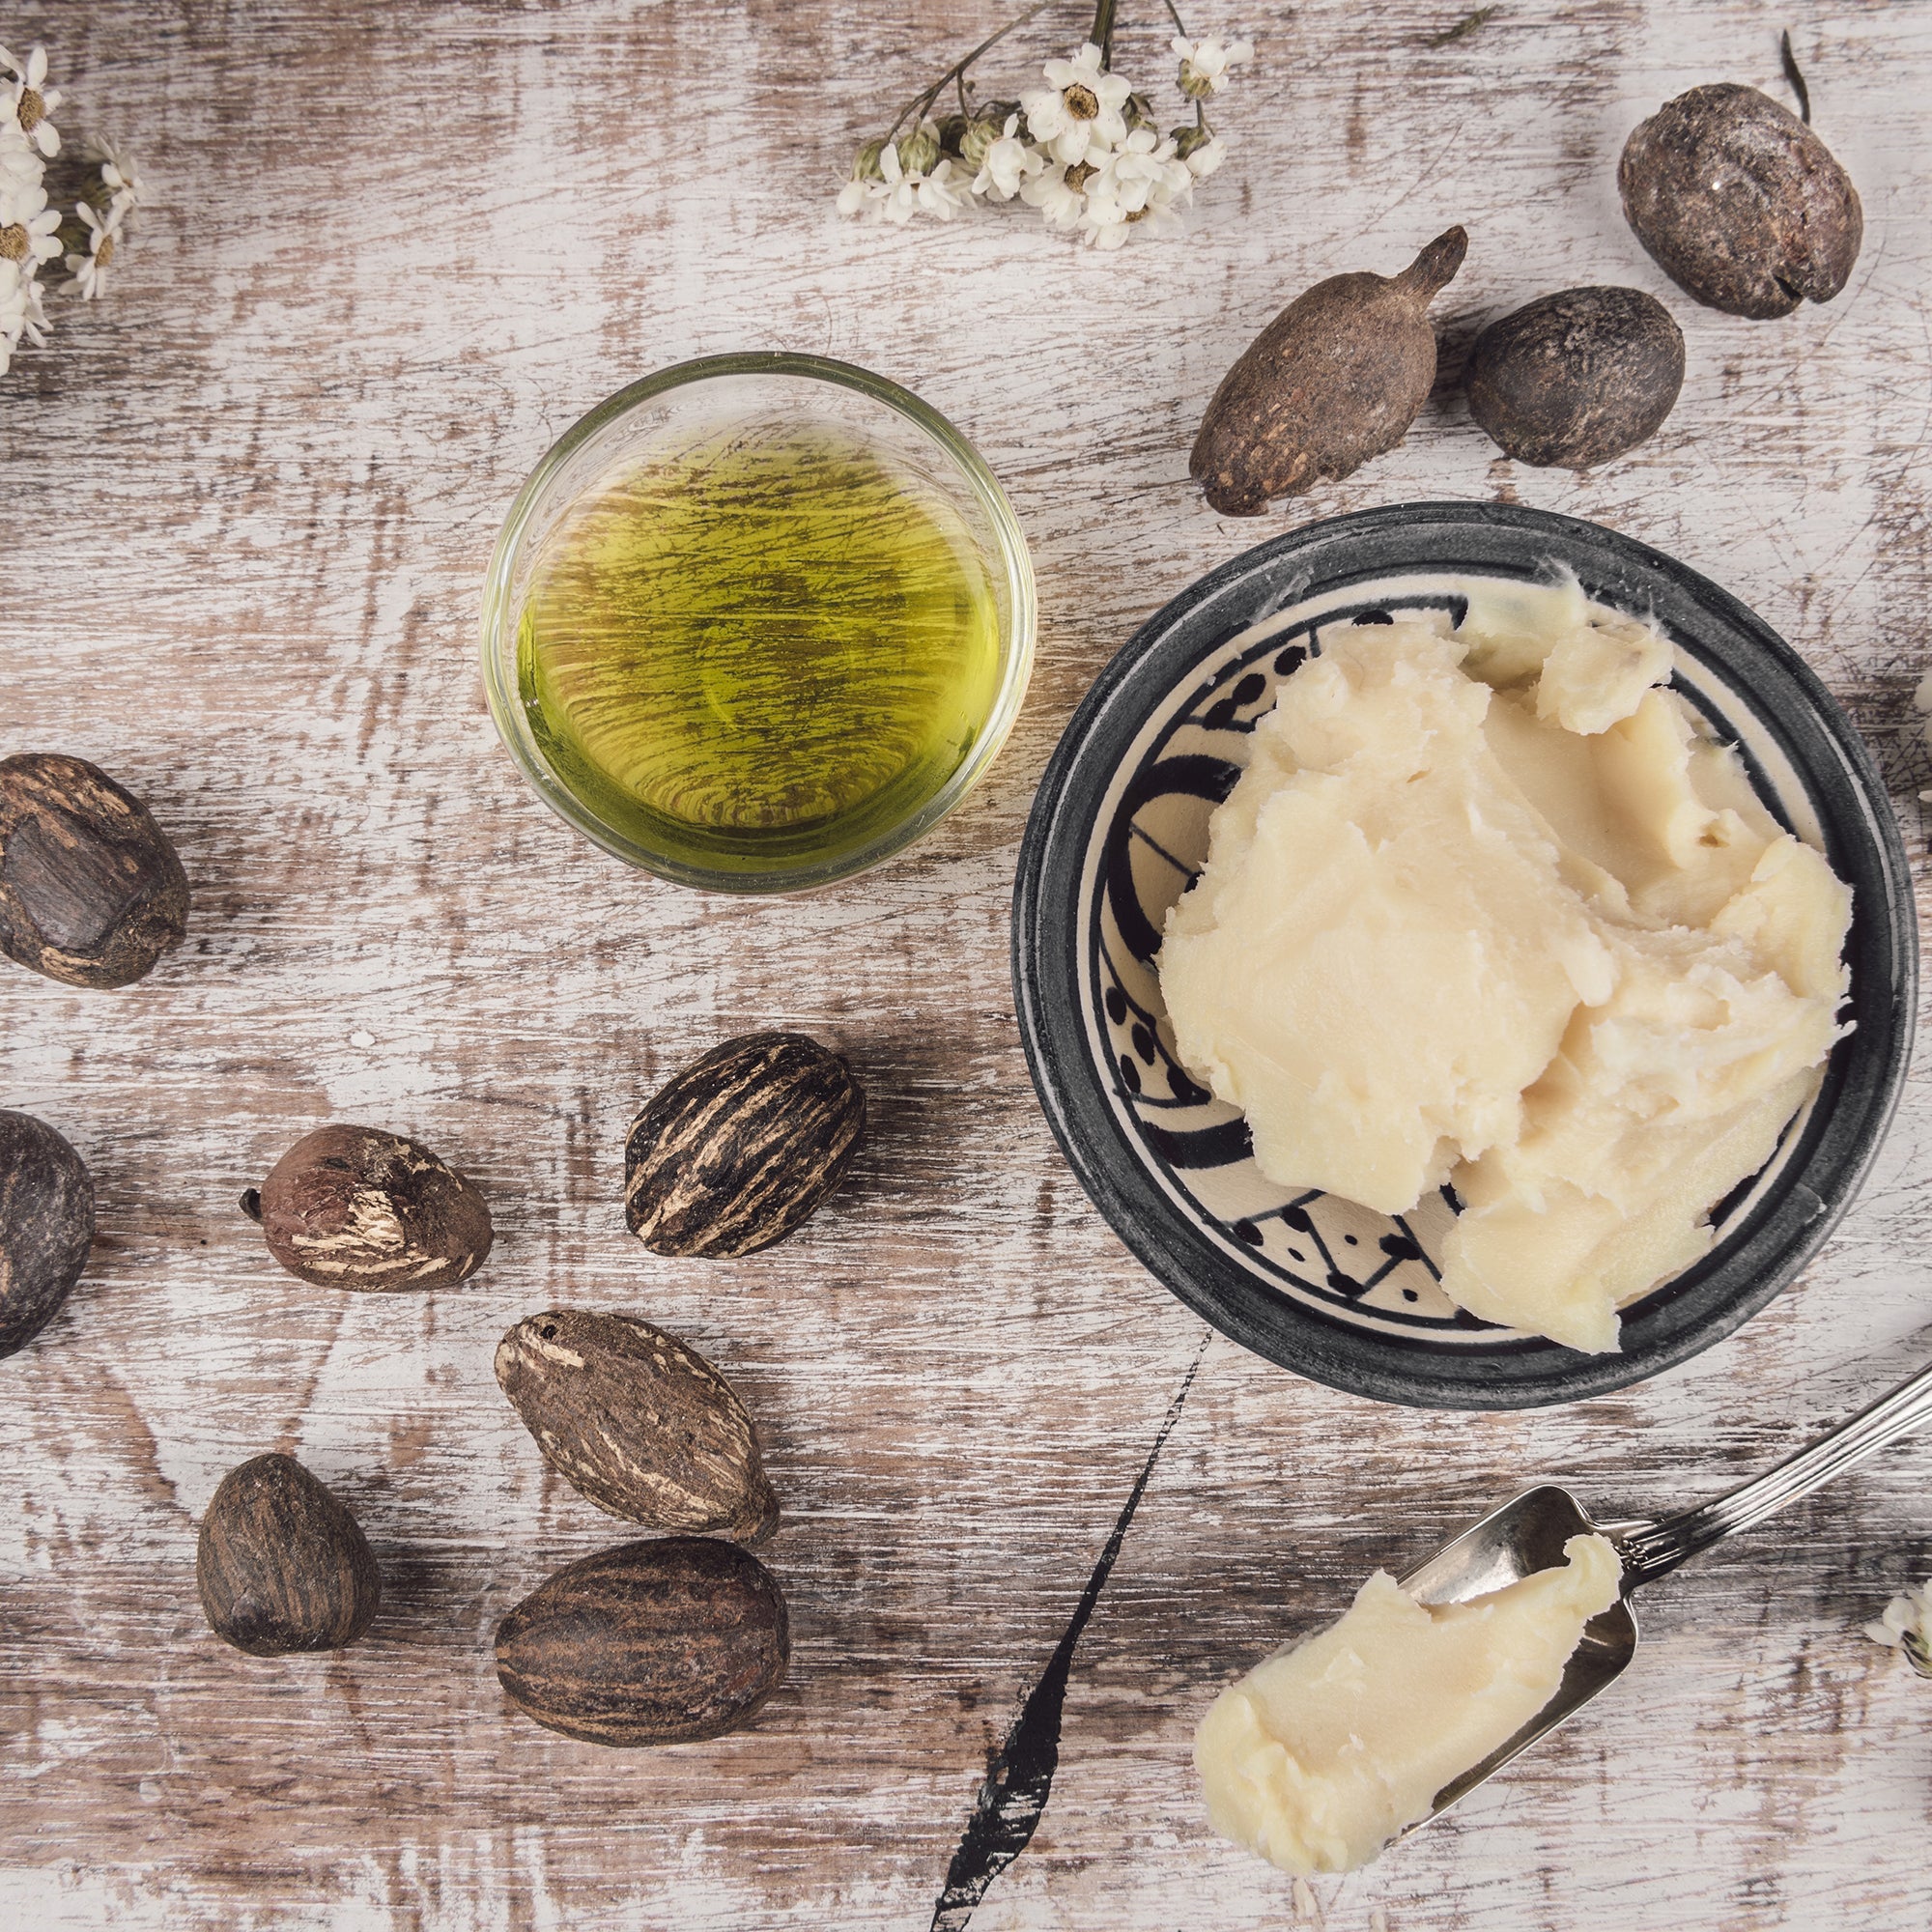 How to use Shea Butter for Skin and Hair? - Juicy Chemistry